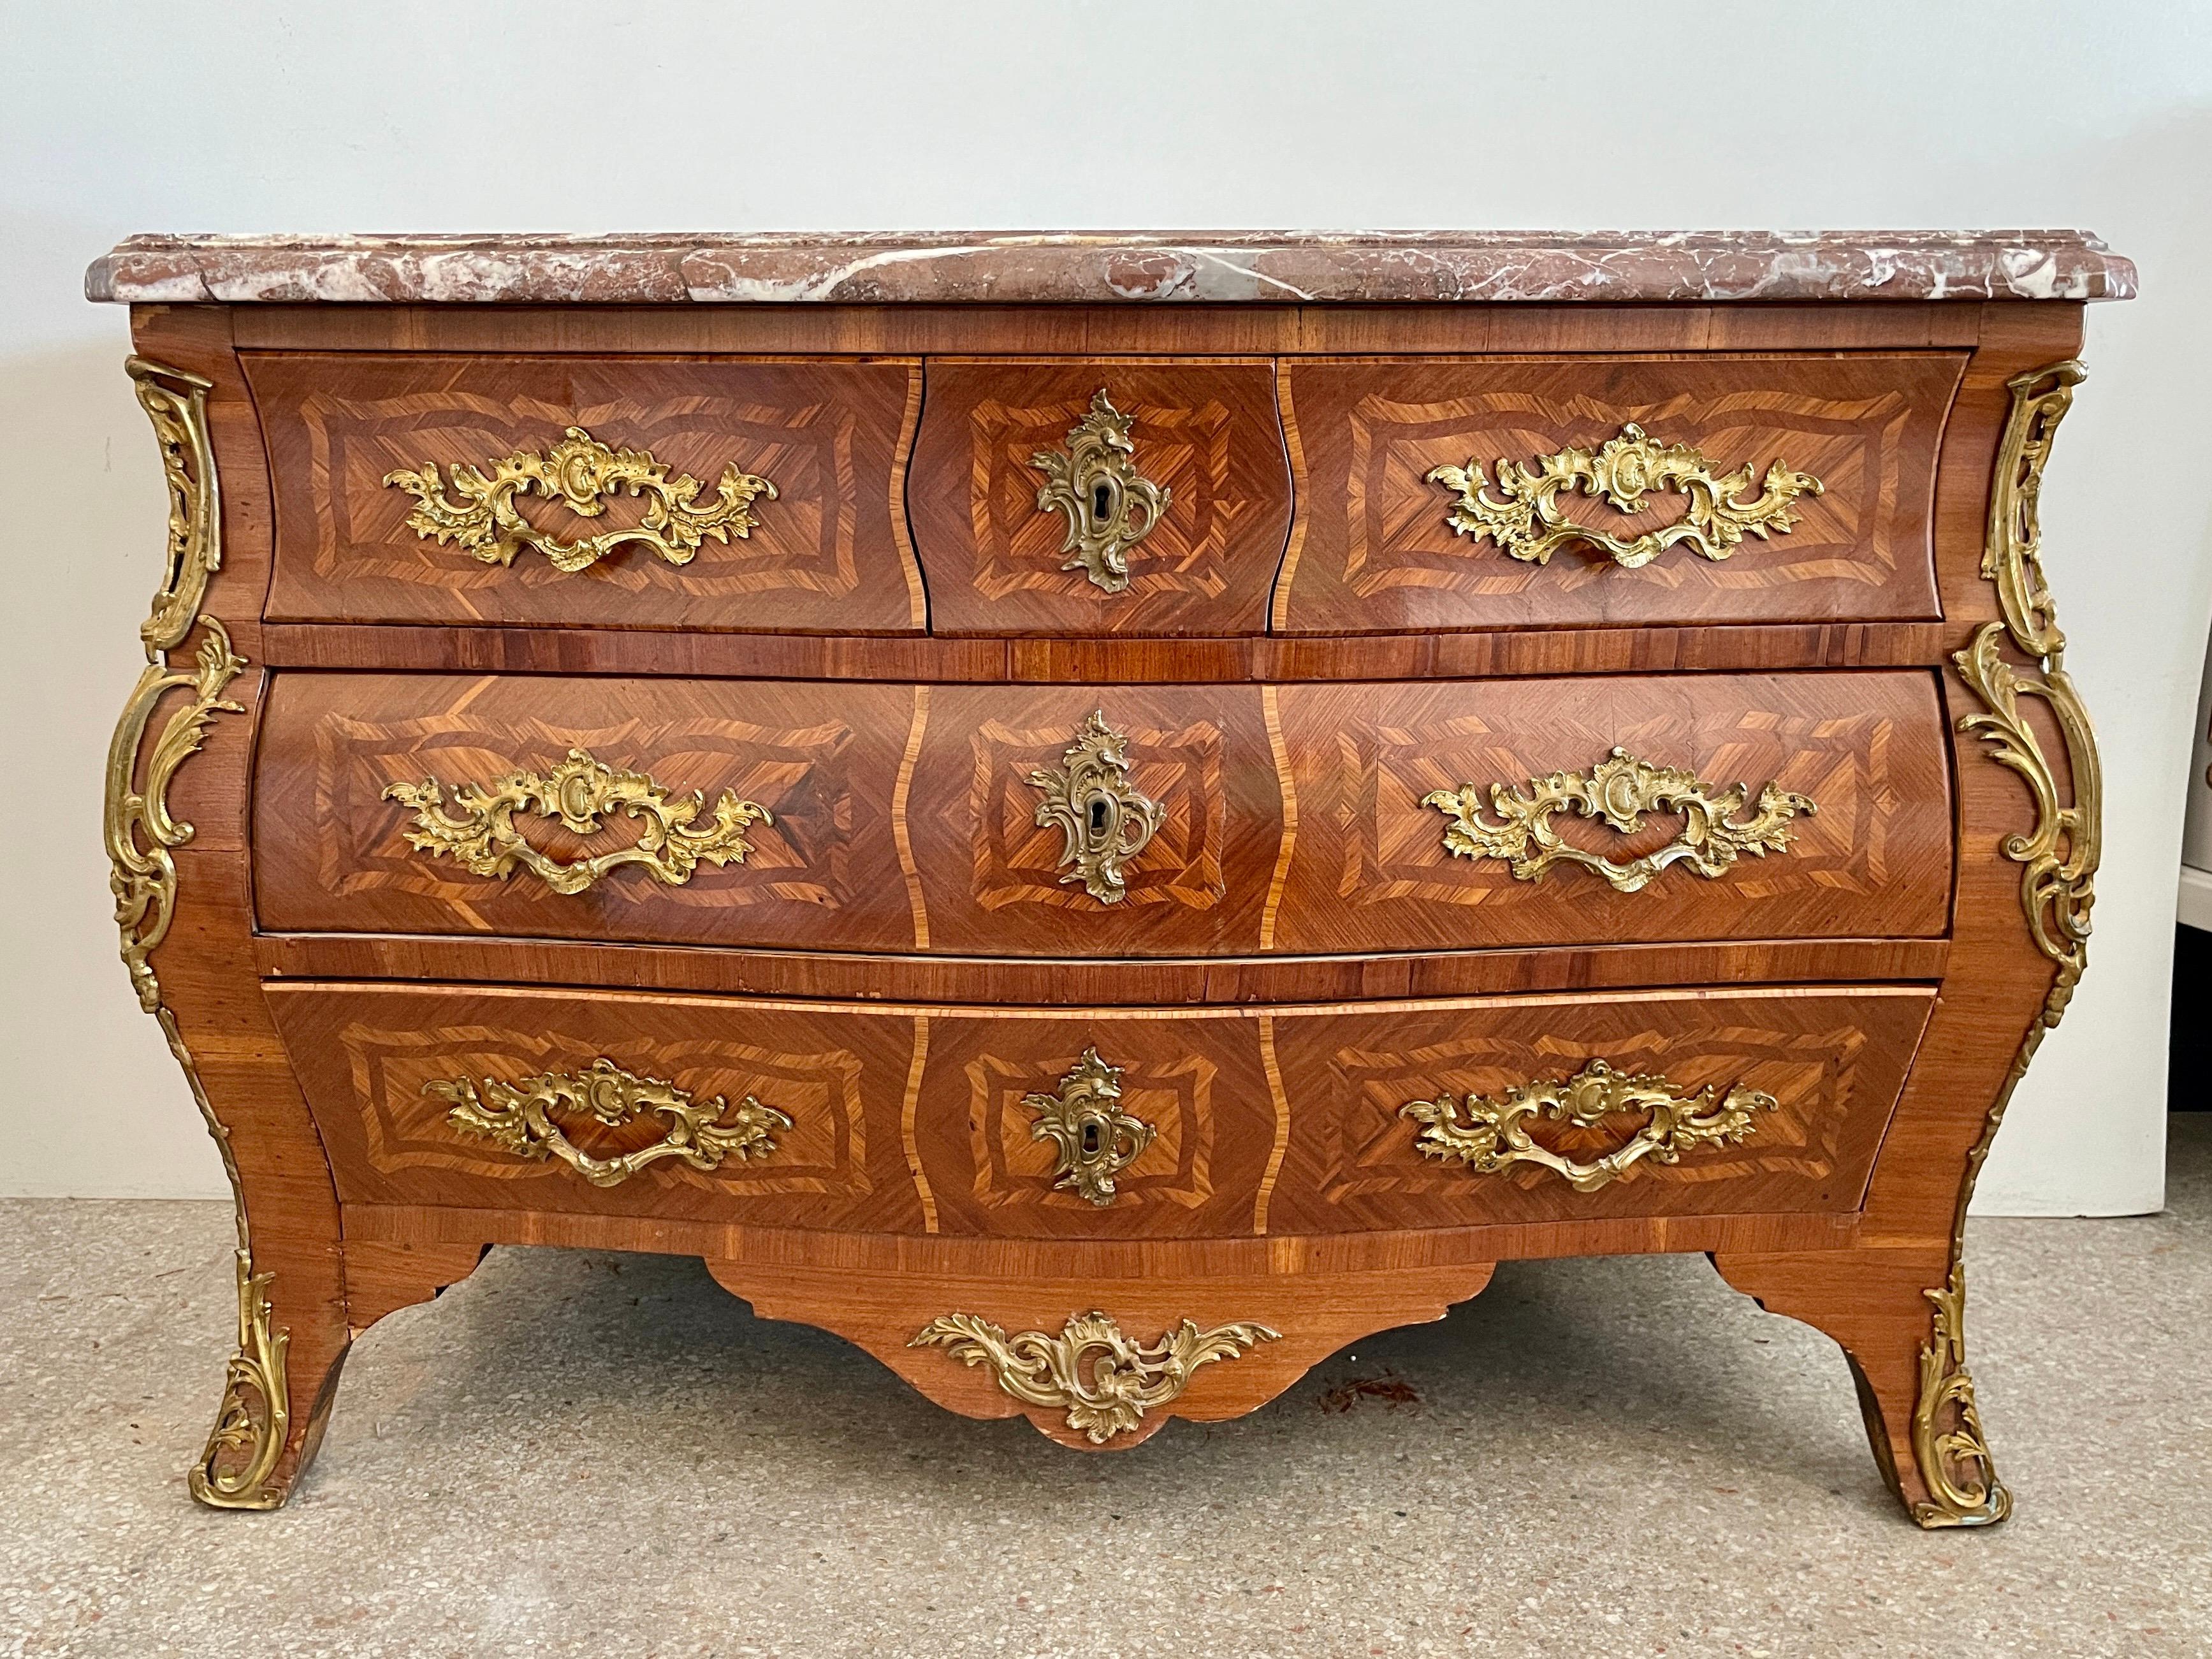 Beautiful French 18th Century Louis XV commode with five drawers for storage, and original marble top. Signed 